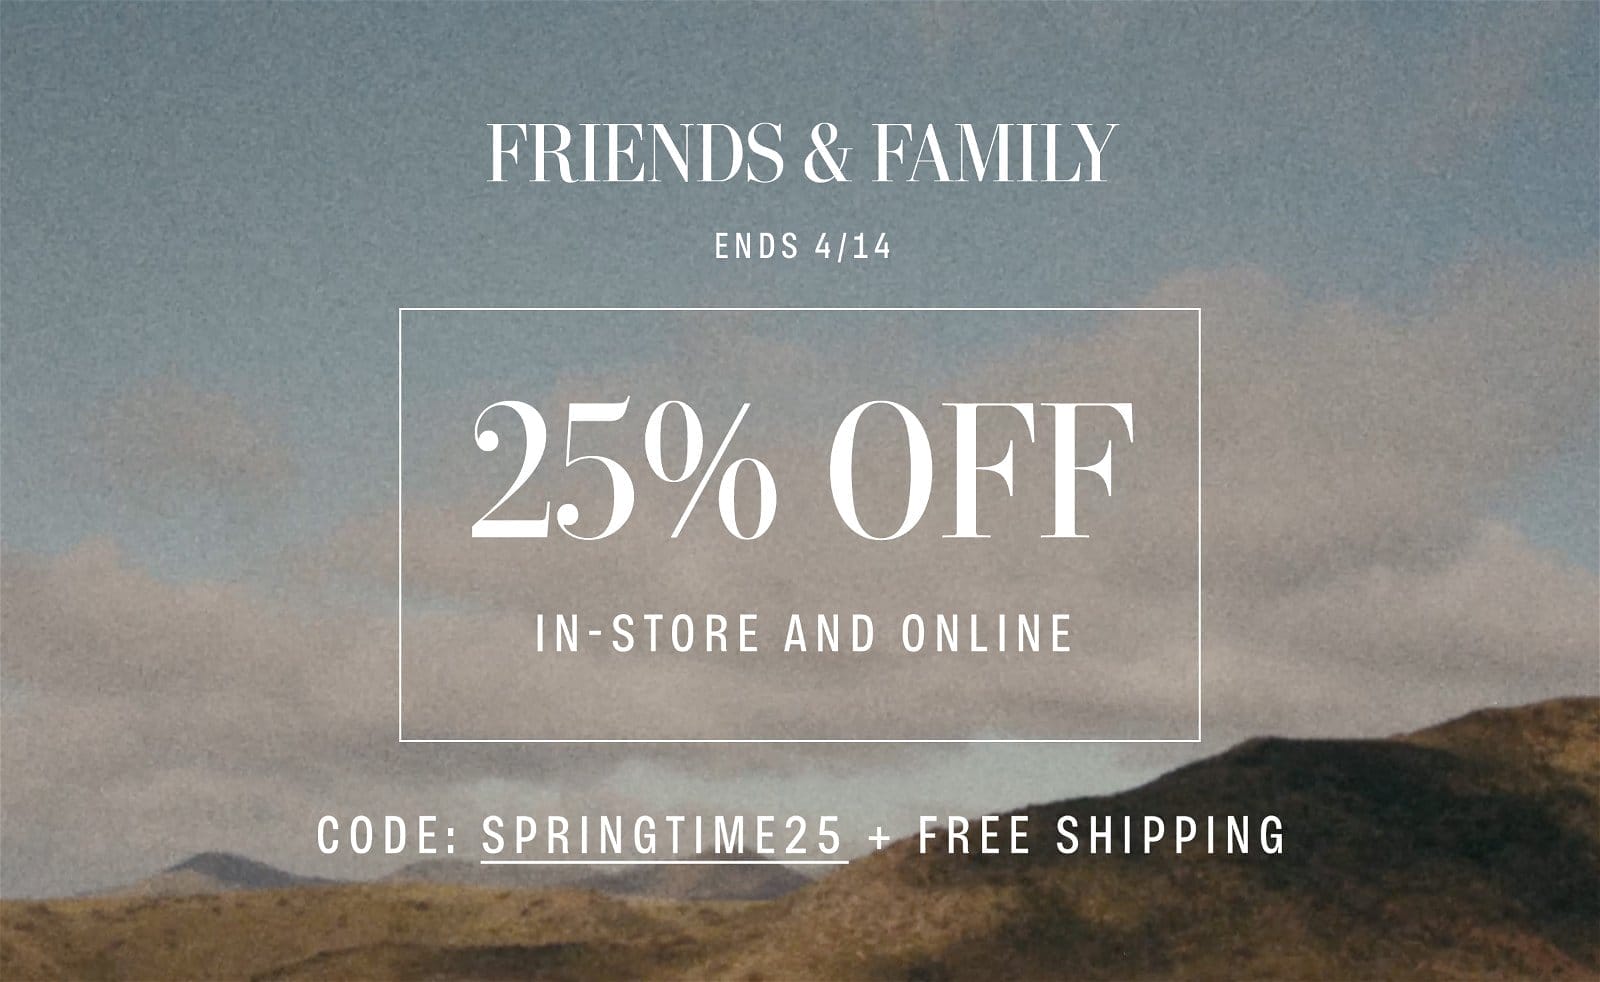 FRIENDS & FAMILY ENDS 4/14. 25% OFF IN-STORE AND ONLINE. CODE: SPRINGTIME25 + FREE SHIPPING